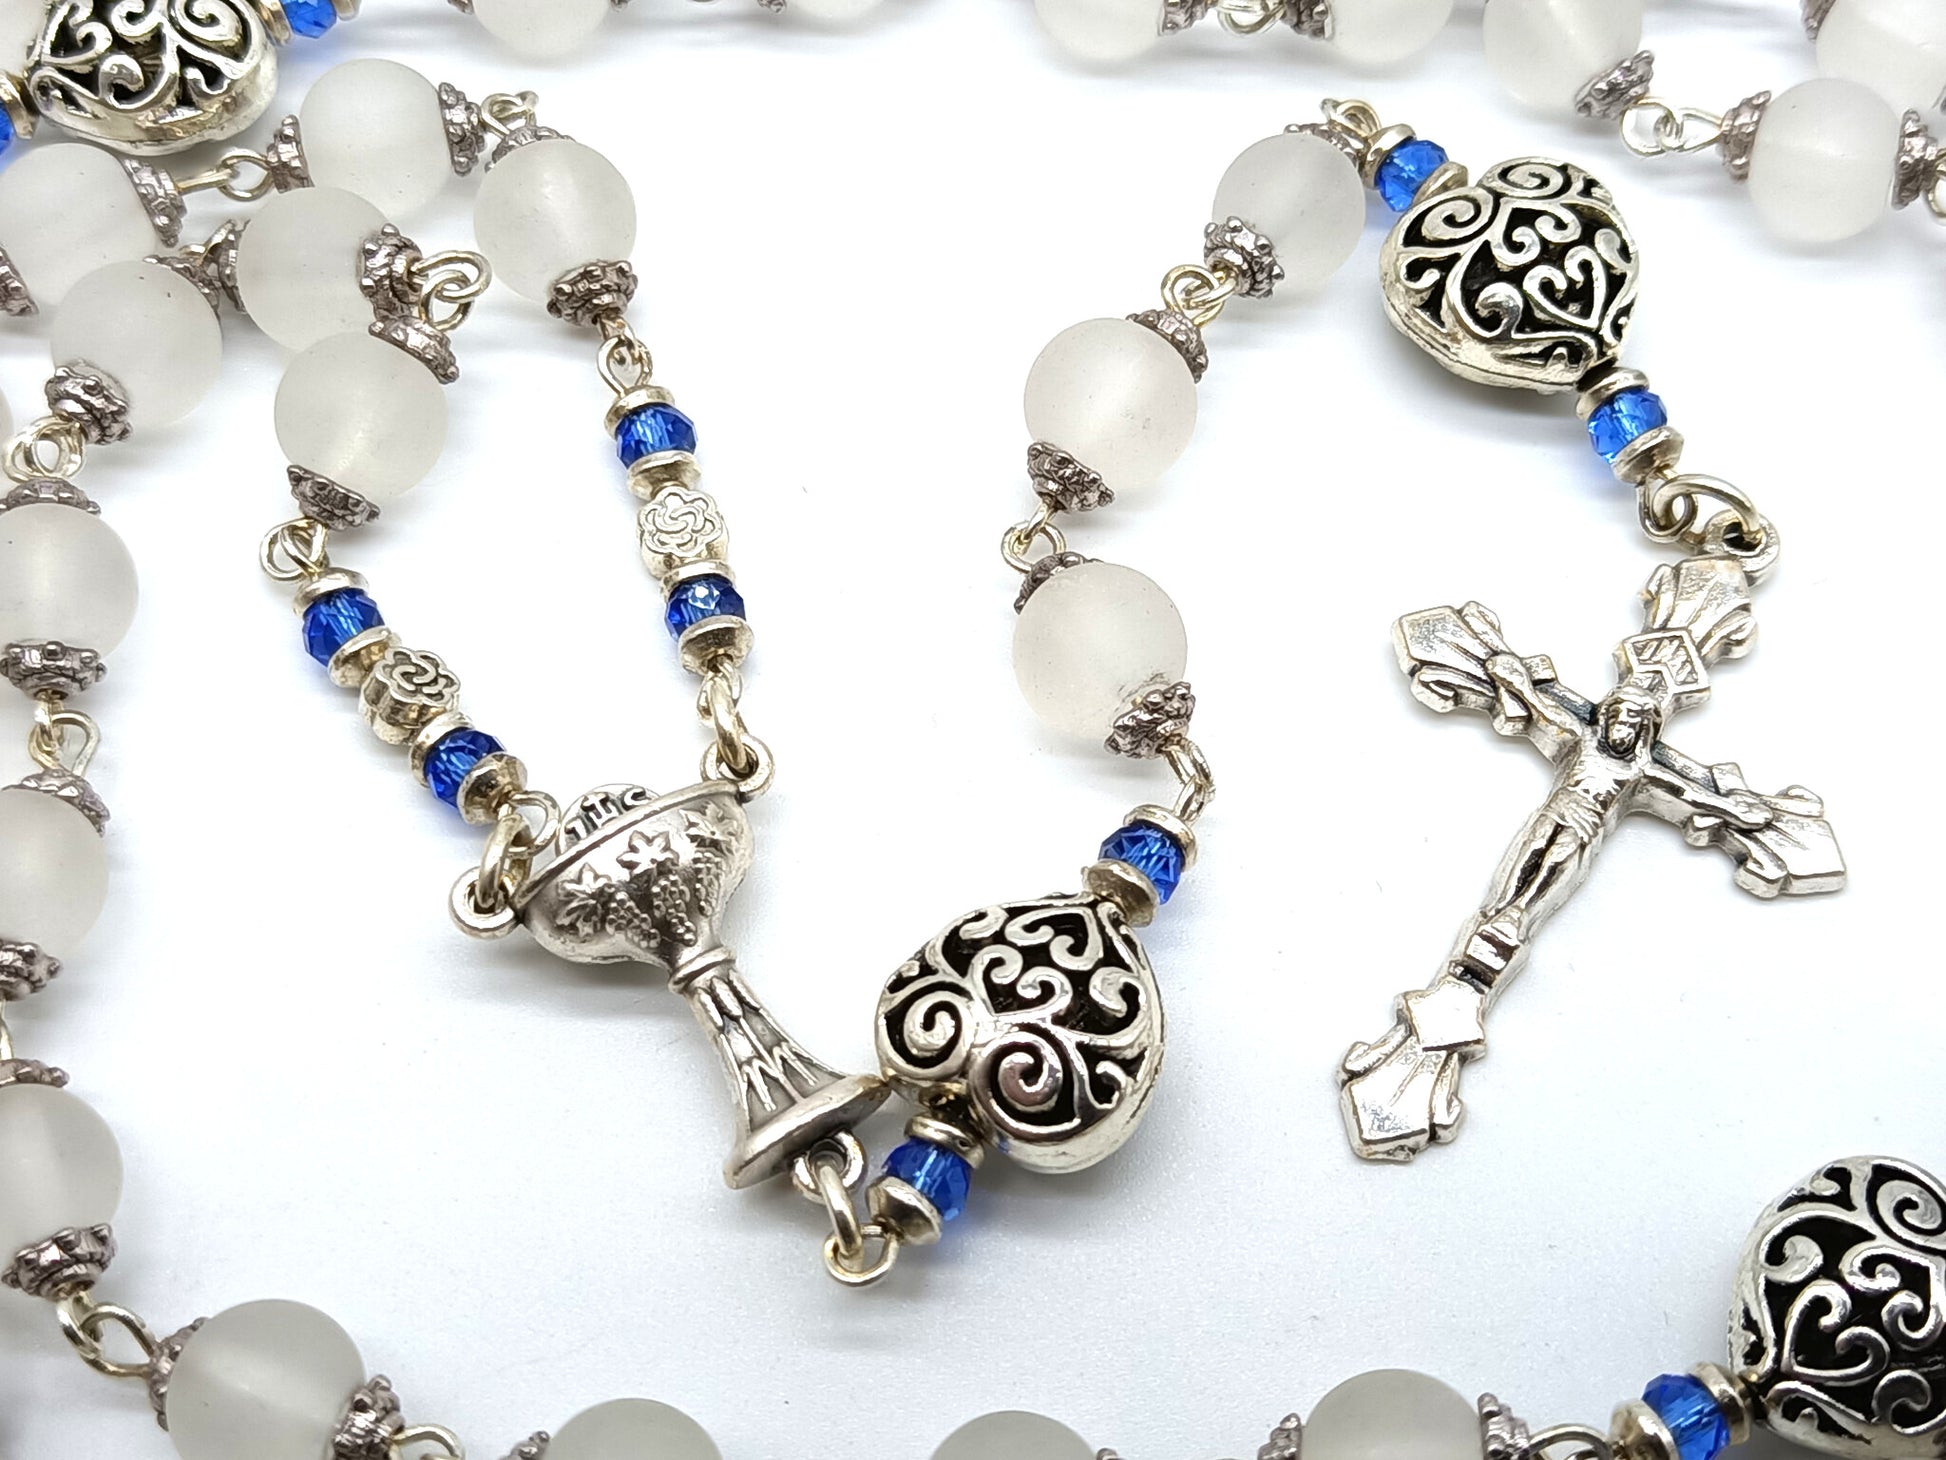 Childs unique rosary beads with white glass beads and silver crucifix and centre medal.